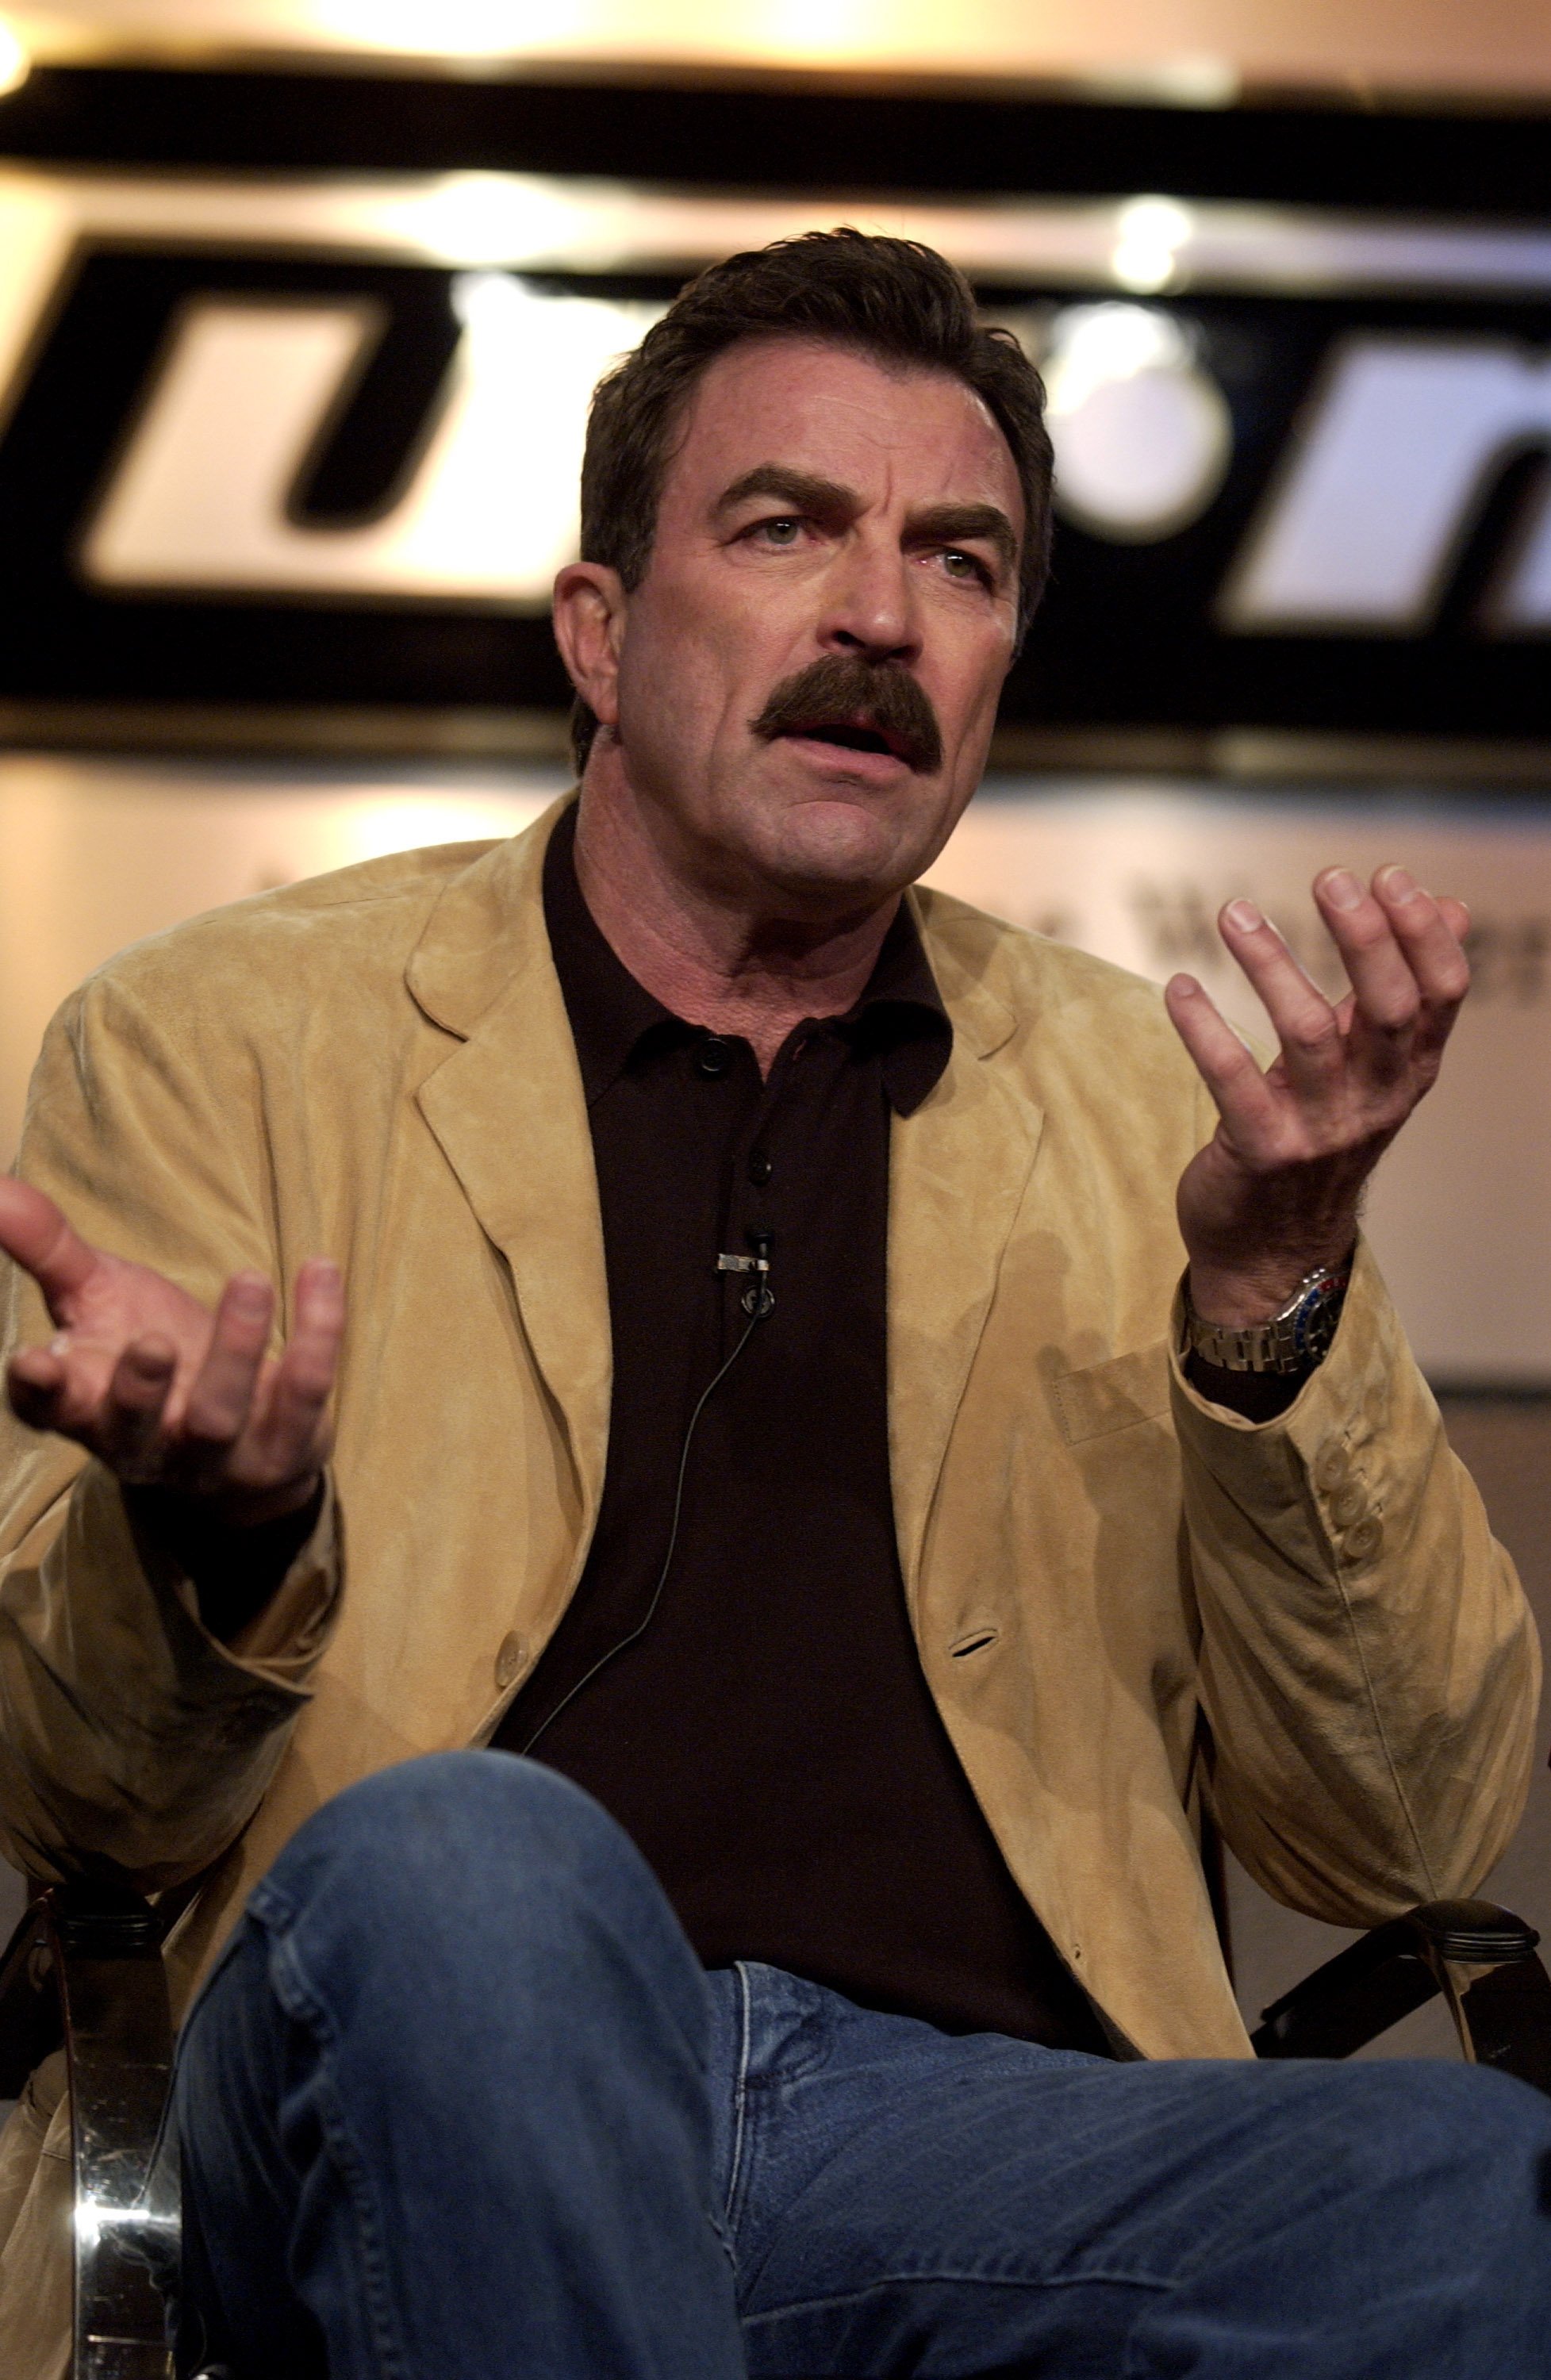 Tom Selleck speaks during the 2003 National Cable & Telecommunications Assn. Press Tour at The Renaissance Hollywood Hotel, California in January 2003. | Photo: Getty Images